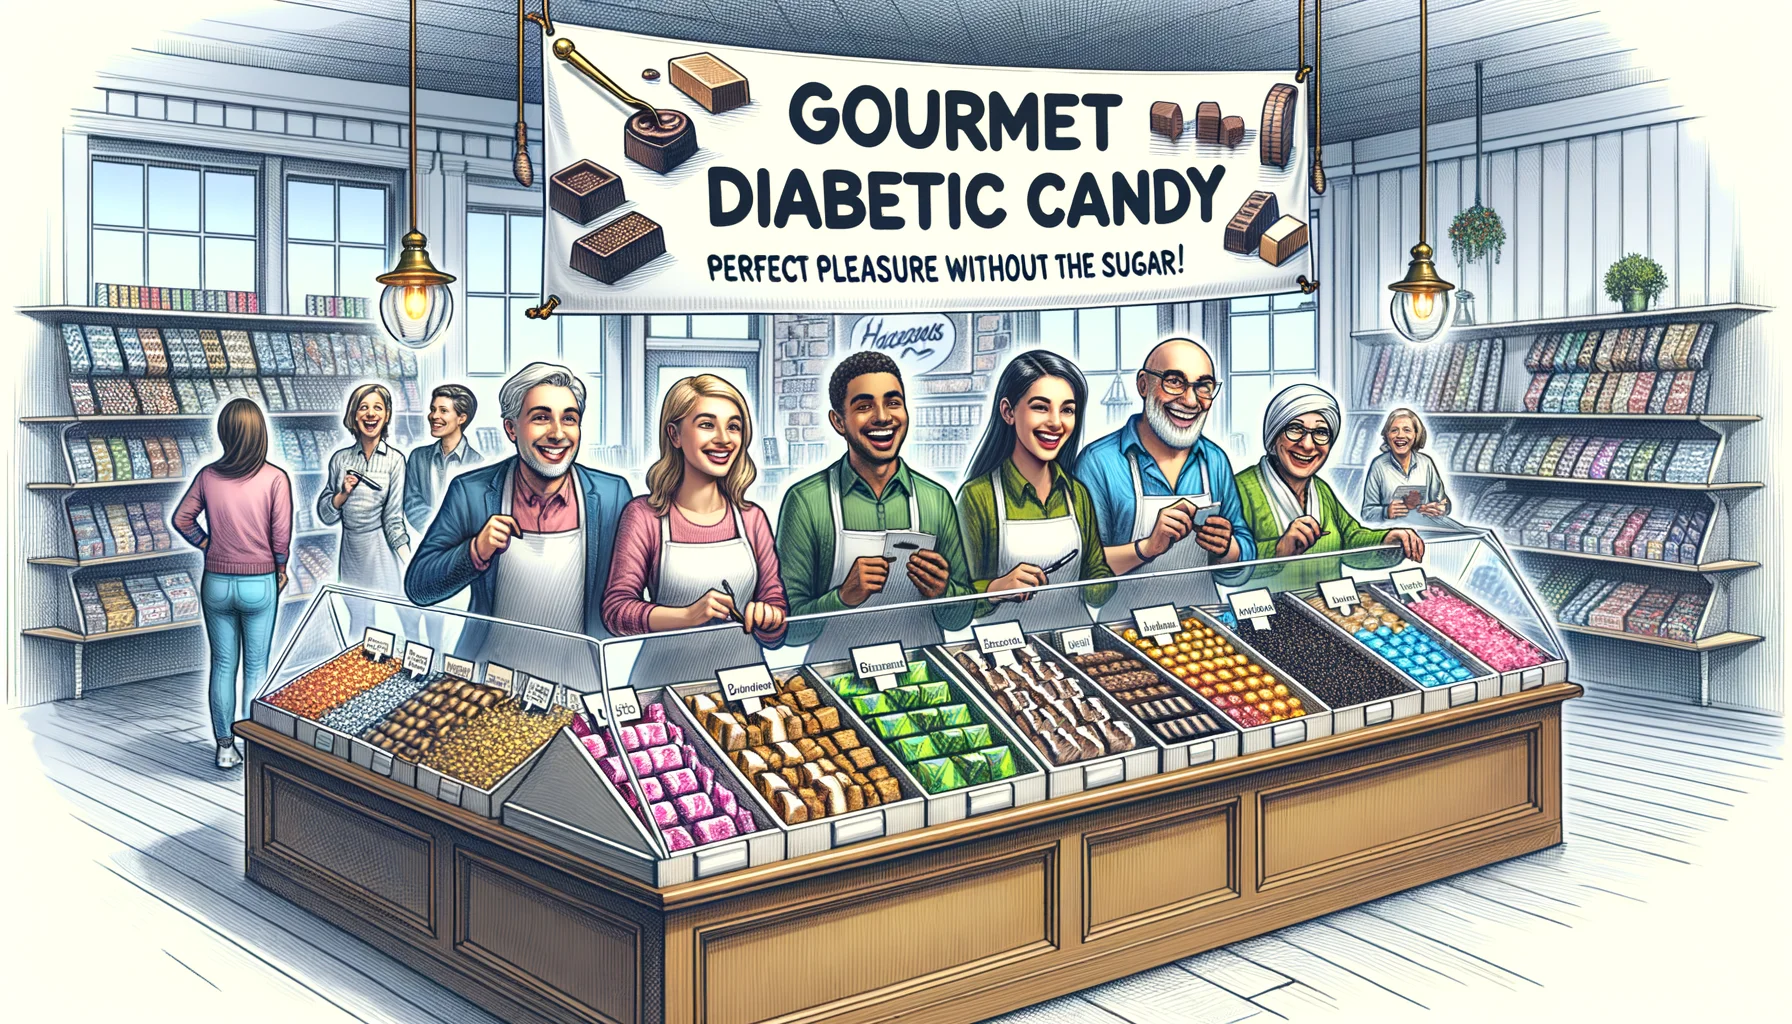 An amusing and realistic image that depicts a perfect scenario for 'Gourmet Diabetic Candy Gifts'. Imagine a fancy candy store with polished wooden shelves stocked with variety of sugar-free gourmet candies, wrapped in elegant and eco-friendly packaging. Joyful customers, diverse in terms of gender and descent - a Caucasian woman, a Middle-Eastern man, a Hispanic teenager and a South Asian senior citizen - are keenly shopping. Sketched on a cheeky banner overhead: 'Gourmet Diabetic Candy - Perfect Pleasure without the Sugar!'